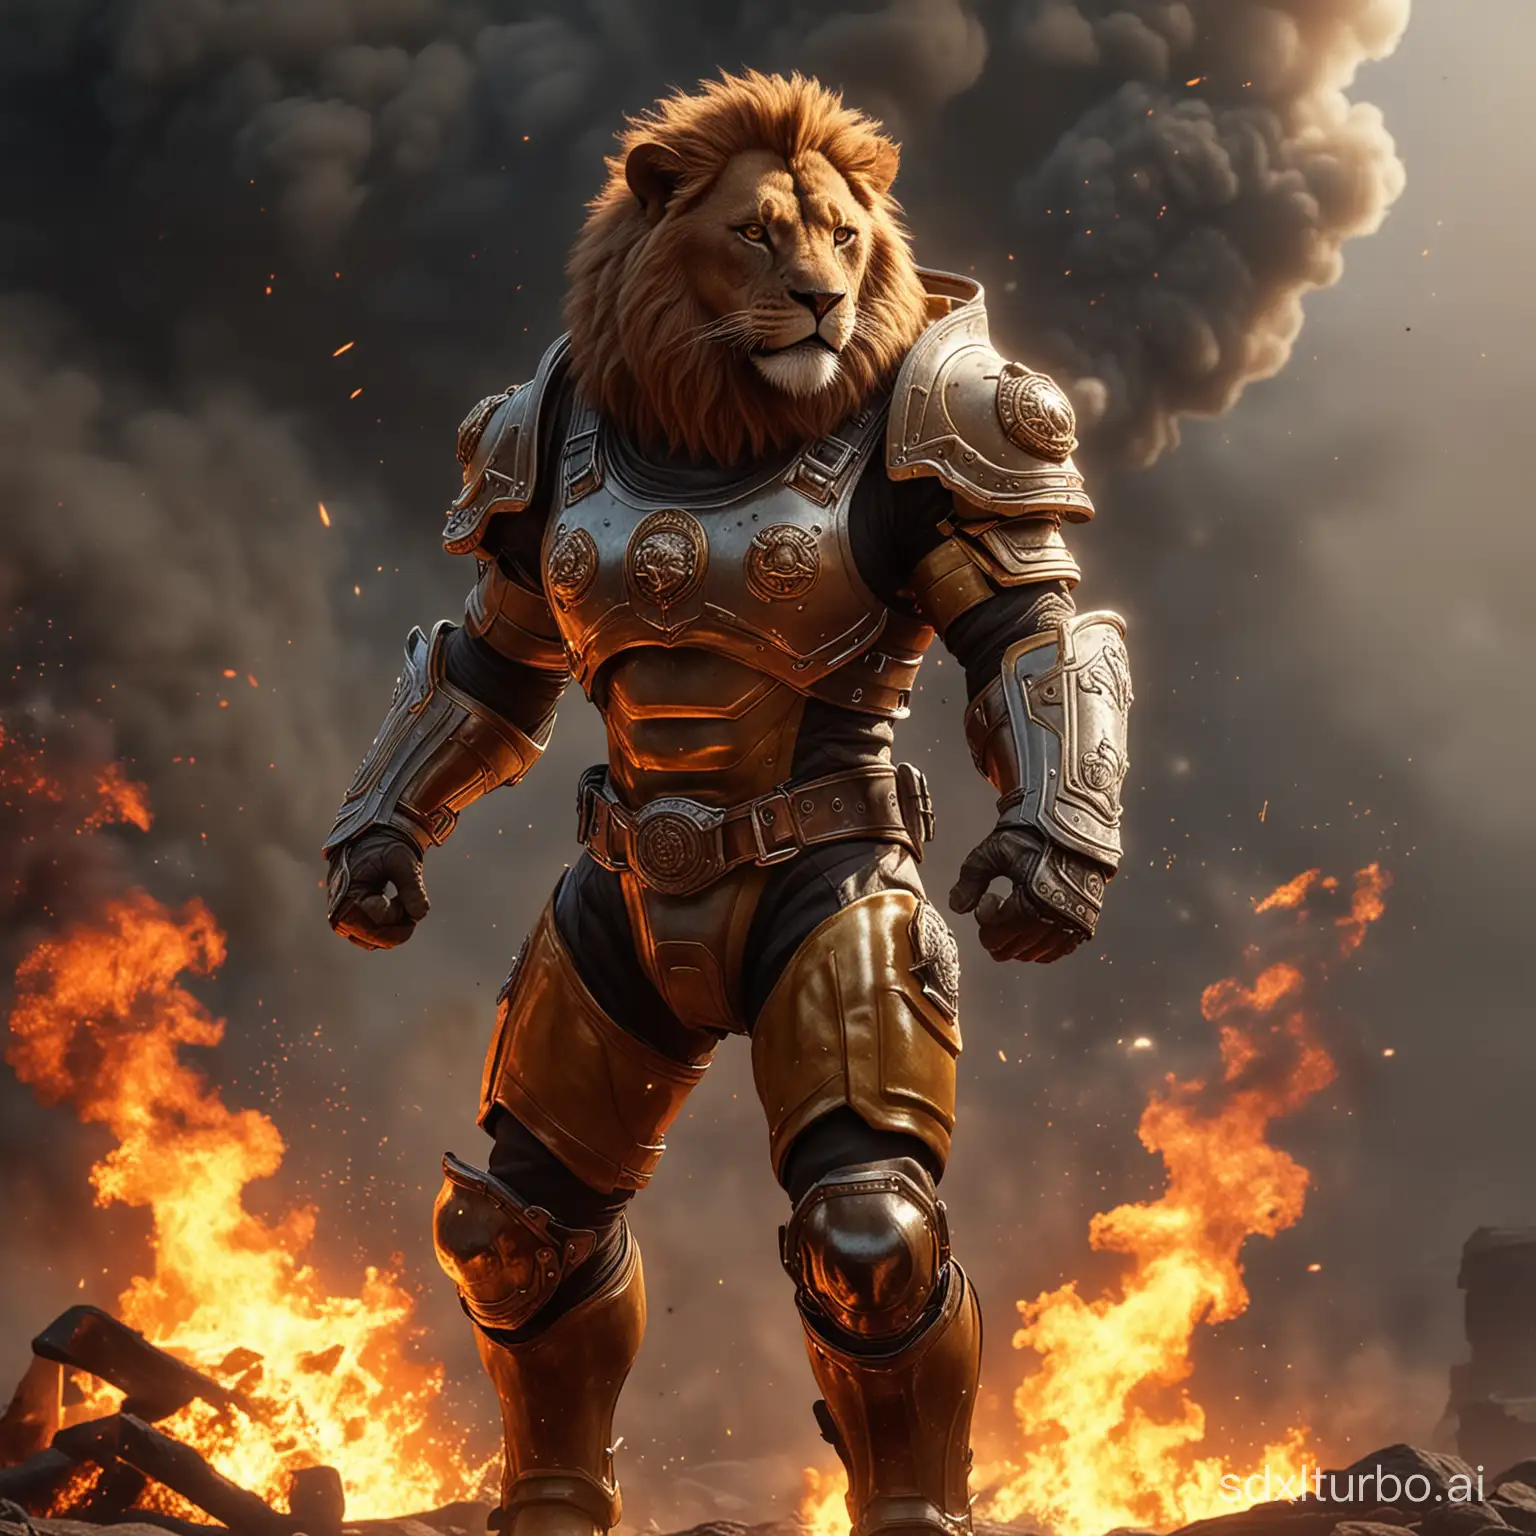 Muscular-Lion-Fighter-Soars-in-Photorealistic-Firefighter-Armor